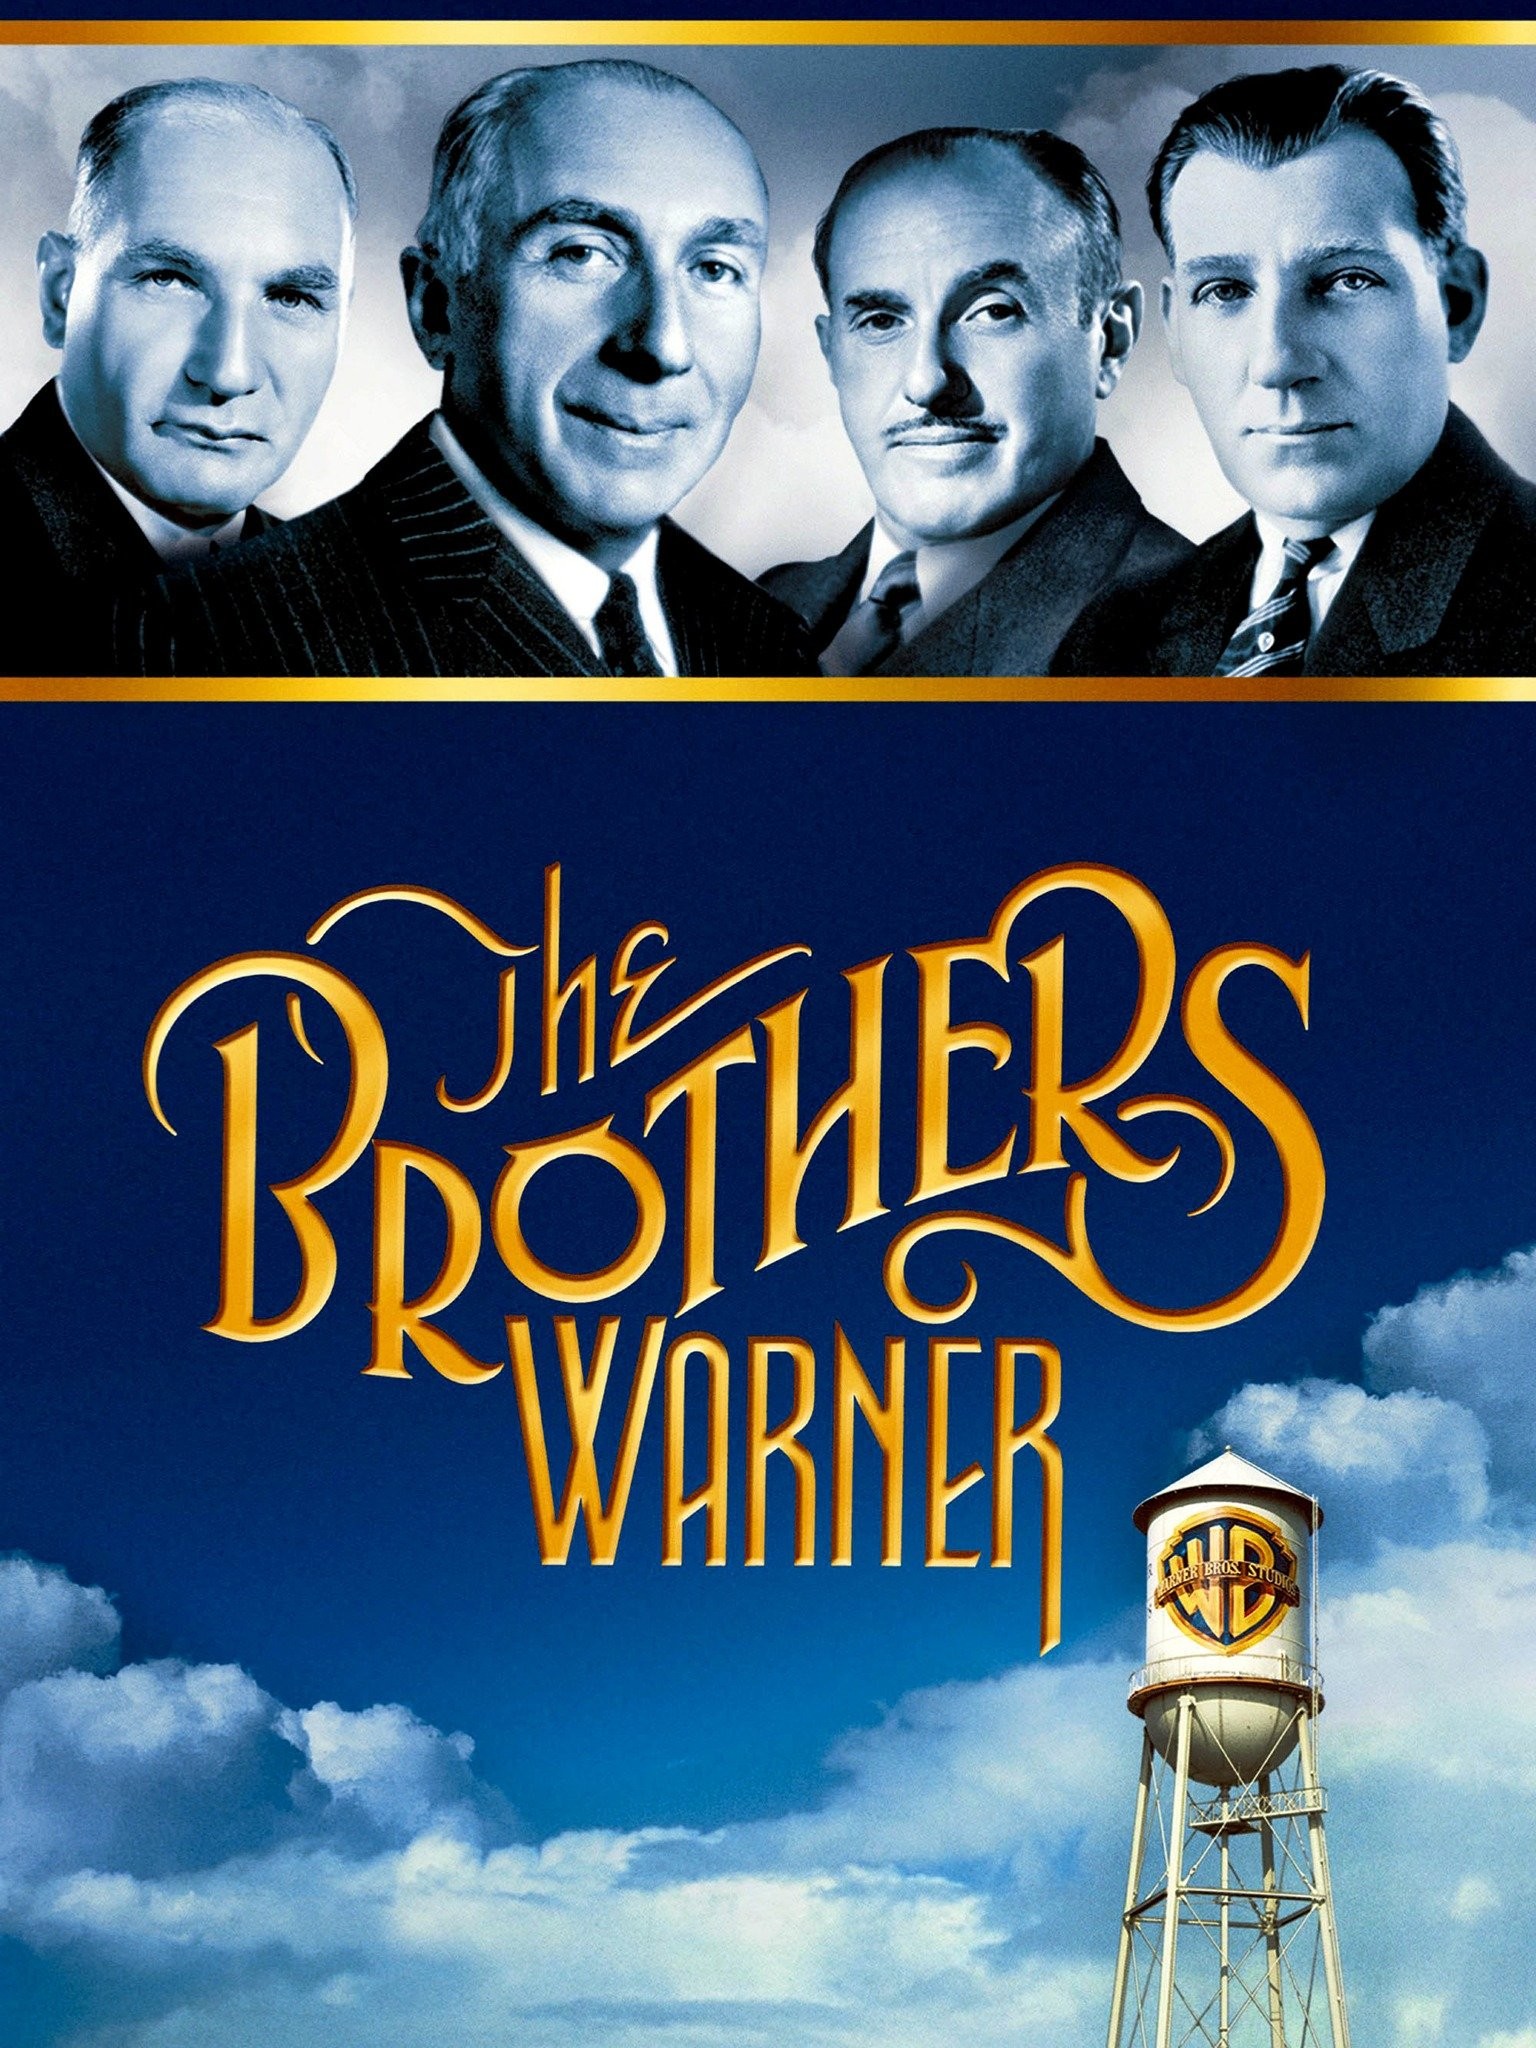 Warner Brothers, History, Movies, TV Shows, & Facts